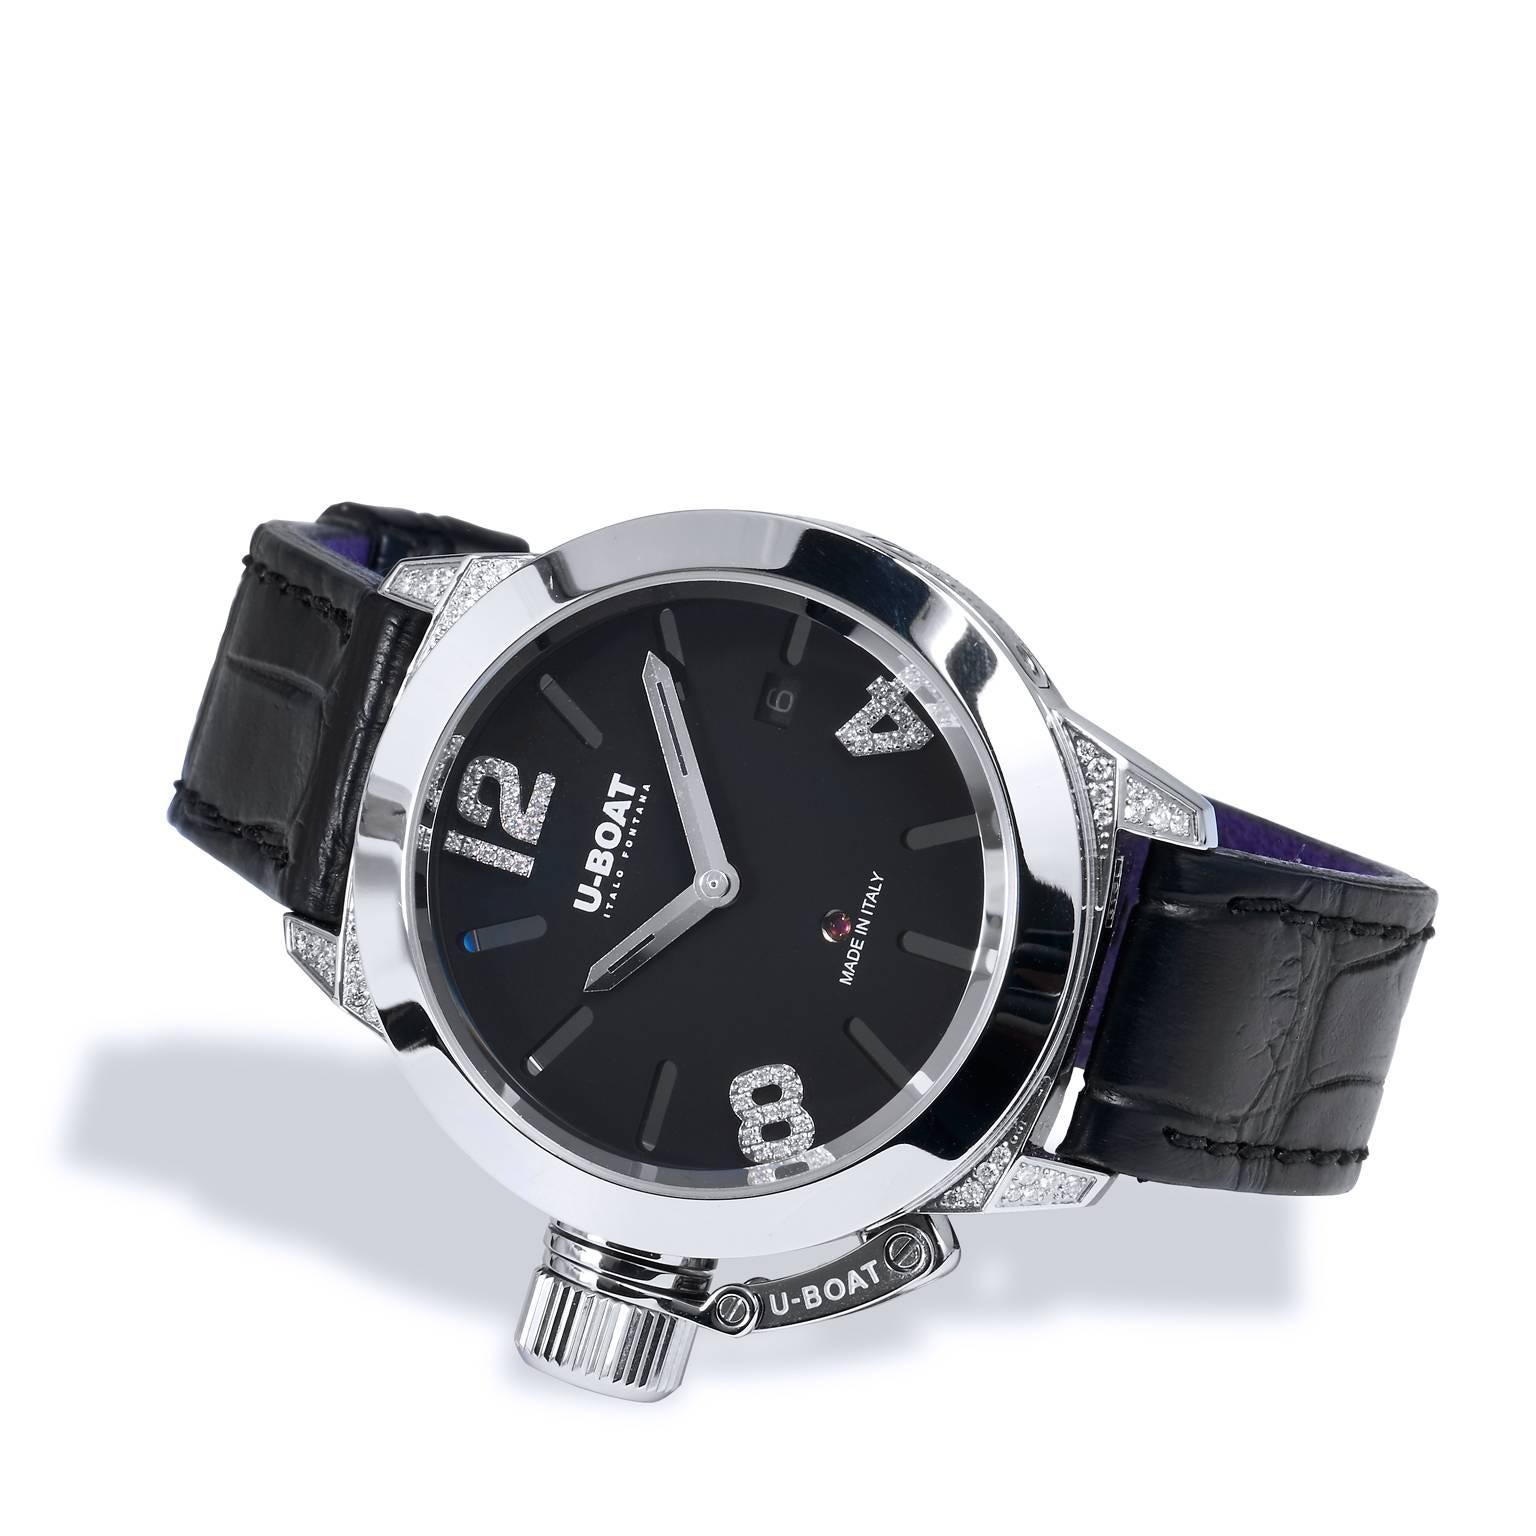 This Classico U-BOAT watch features a stainless steel case with a black dial that is adorned with diamond numbers and legs. The piece is complete with a black leather strap. New List Retail Price is $5,350. Our price is $4,280